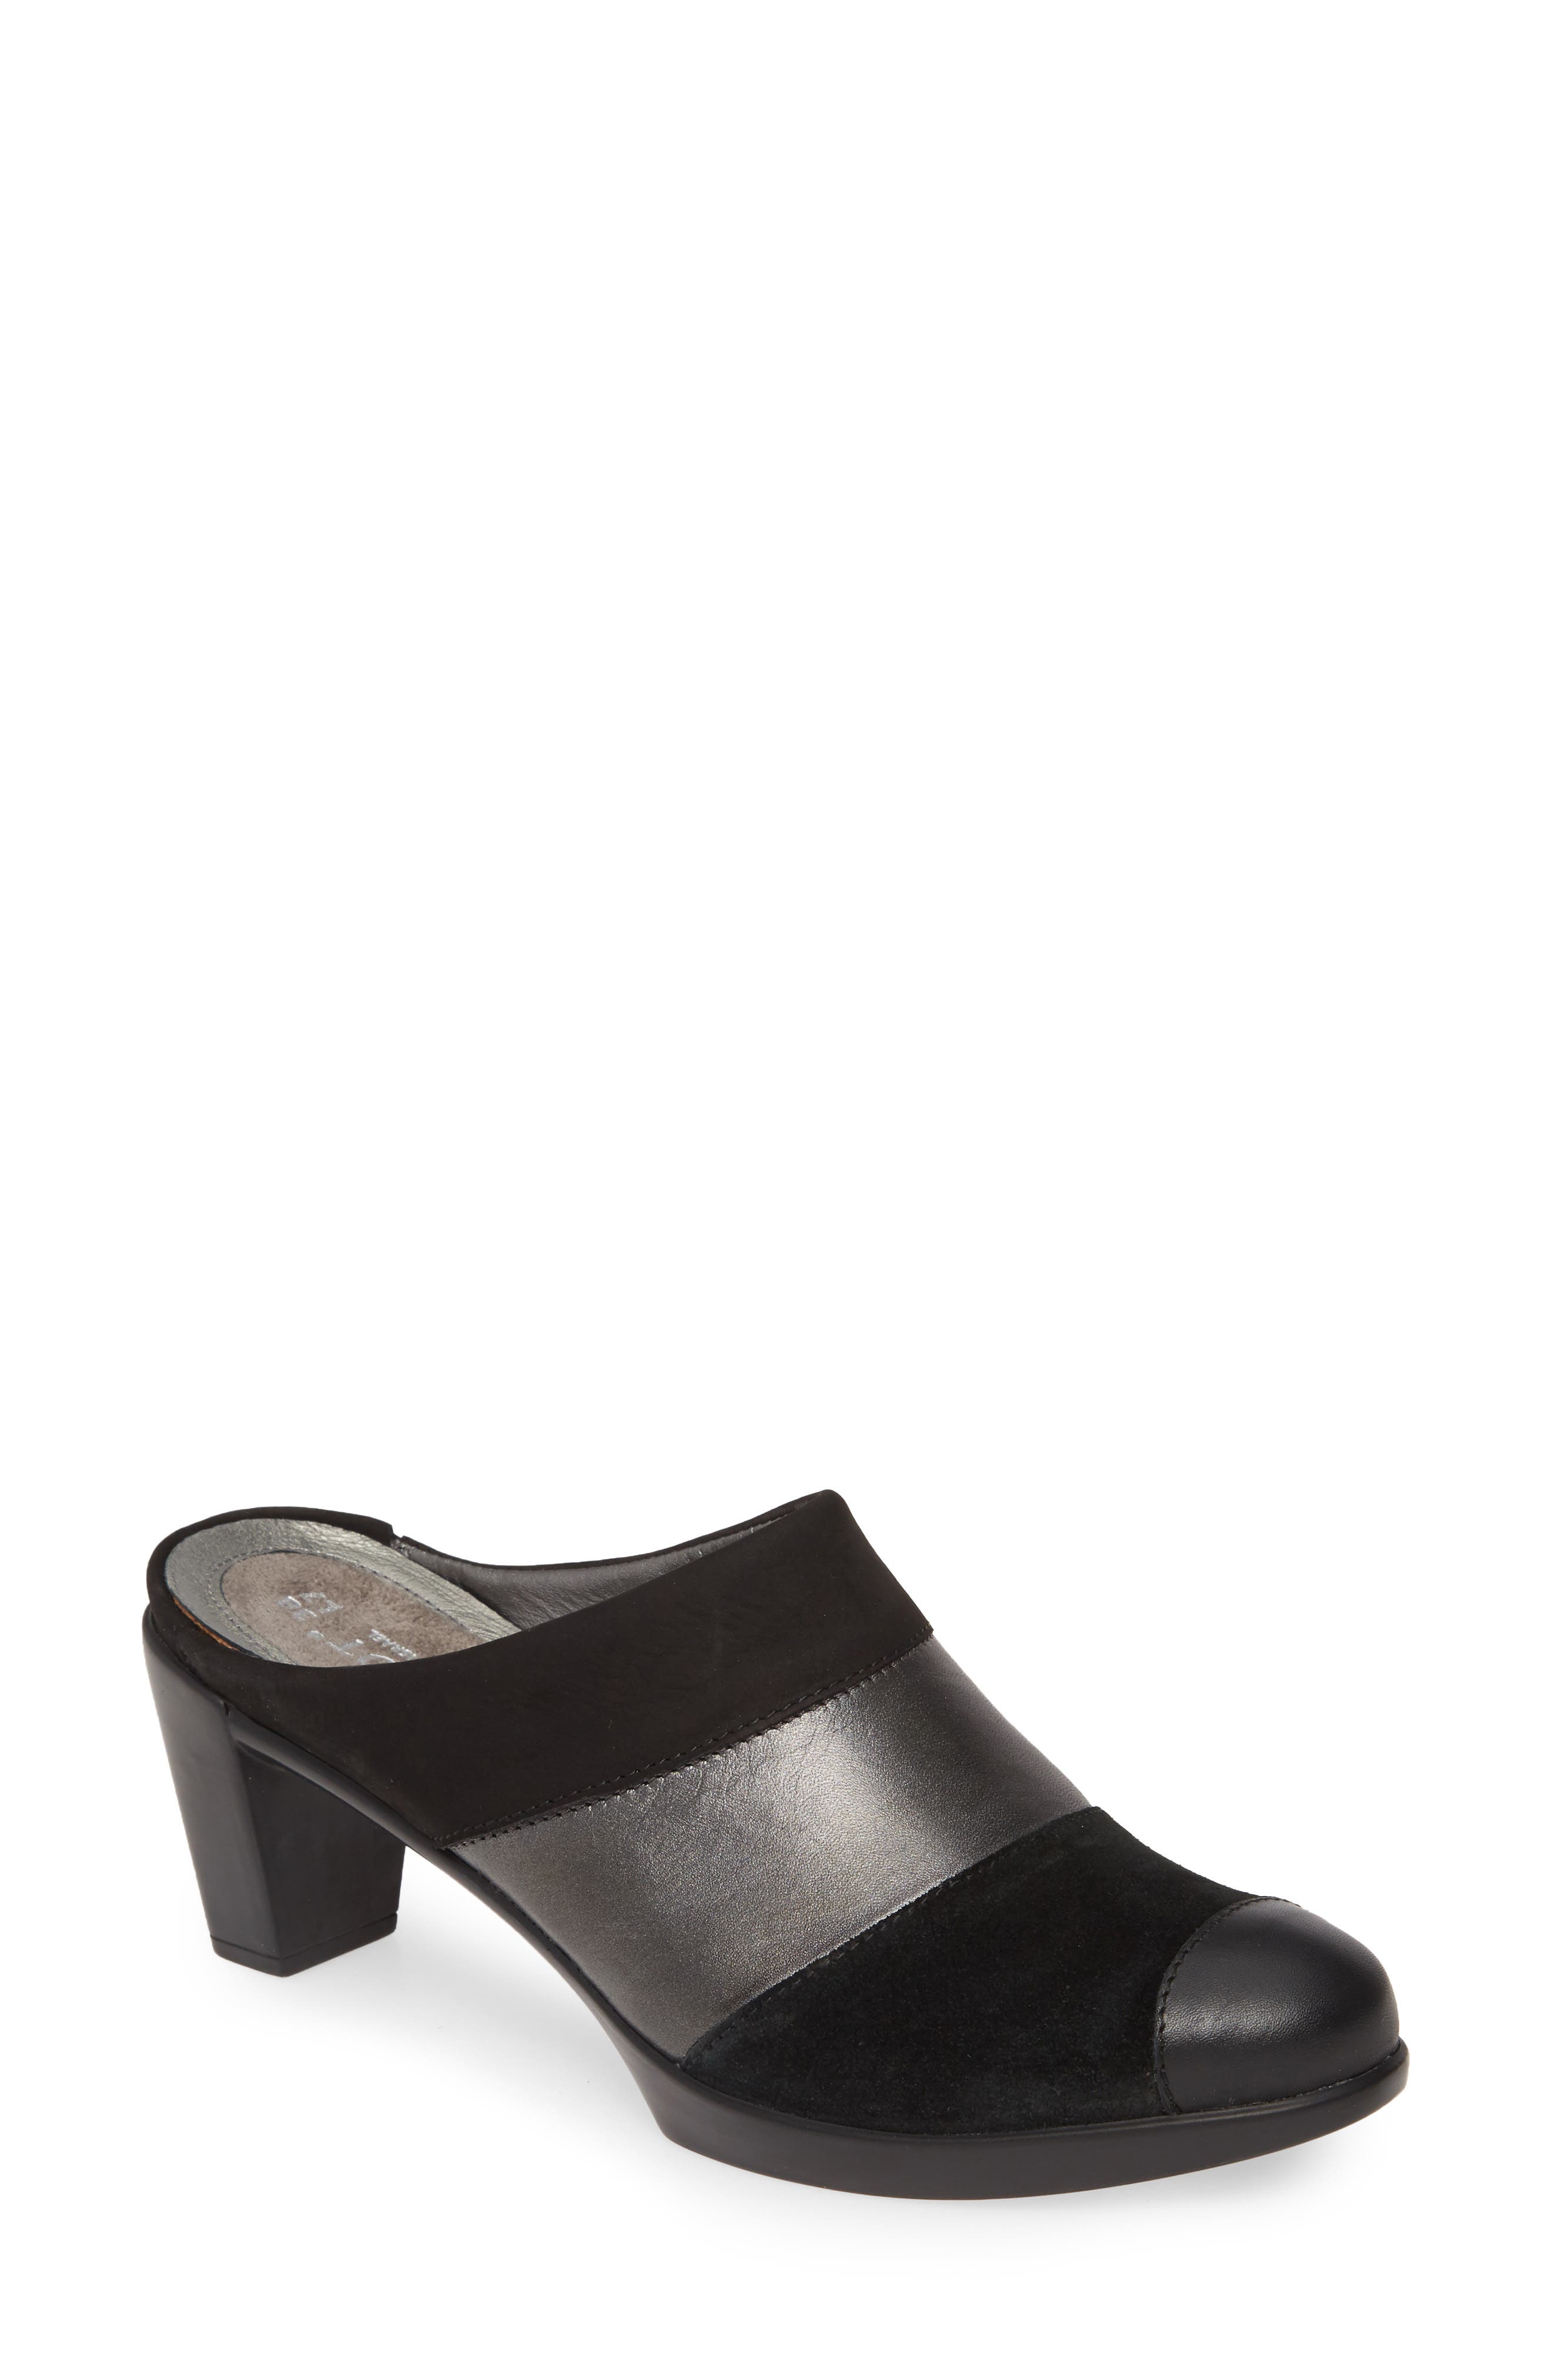 nordstrom naot womens shoes